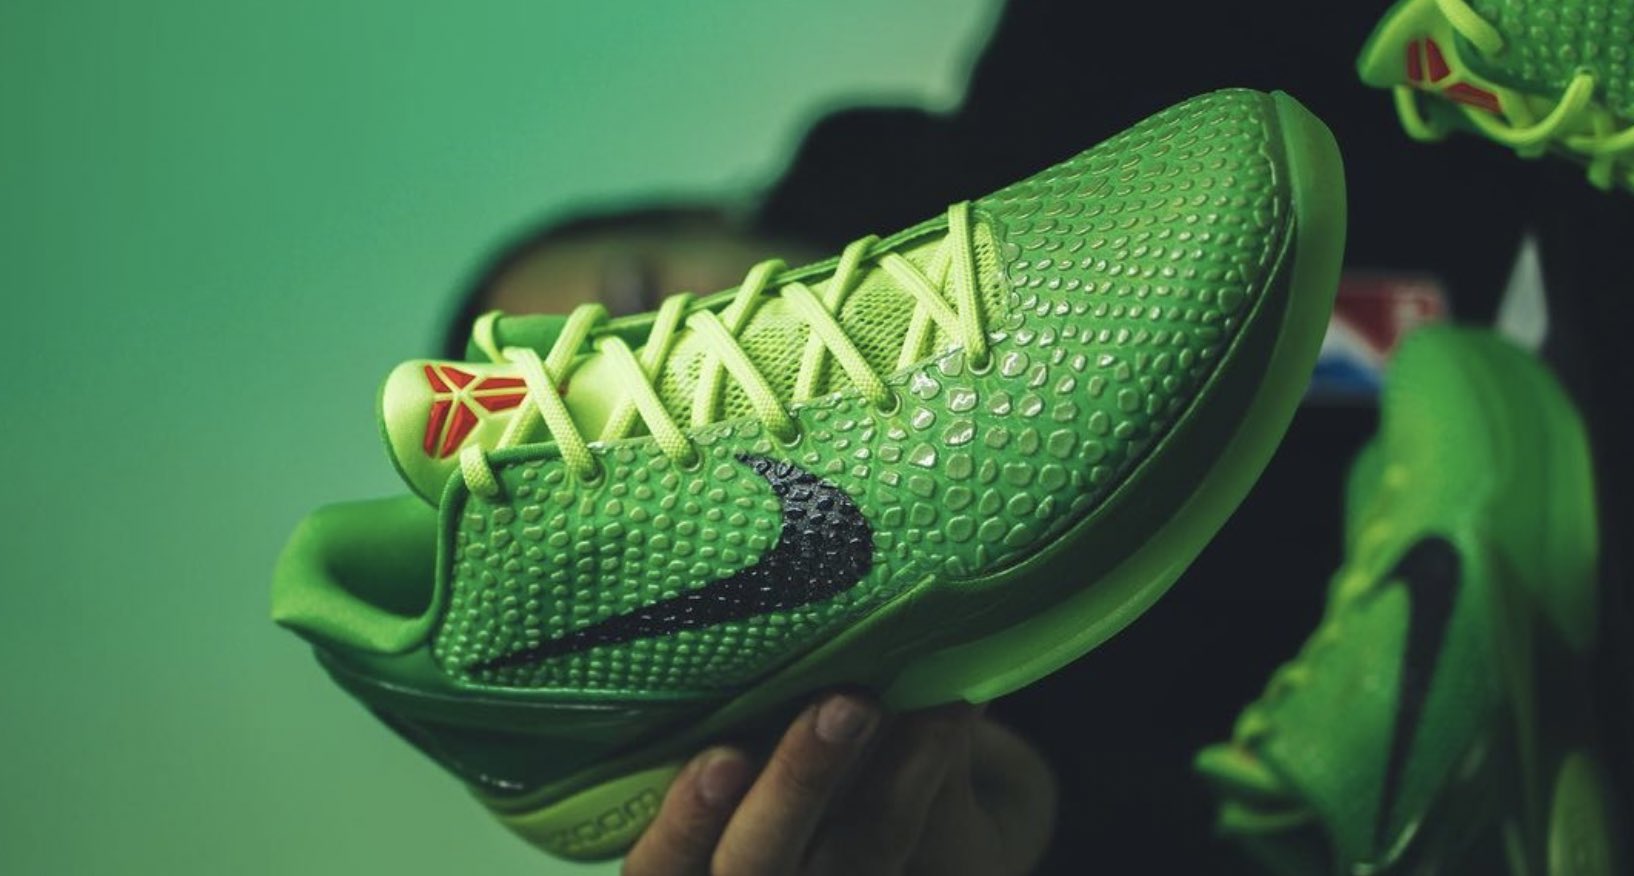 Modern Notoriety Zoom Kobe VI “Grinch” 2021 if you need a pair